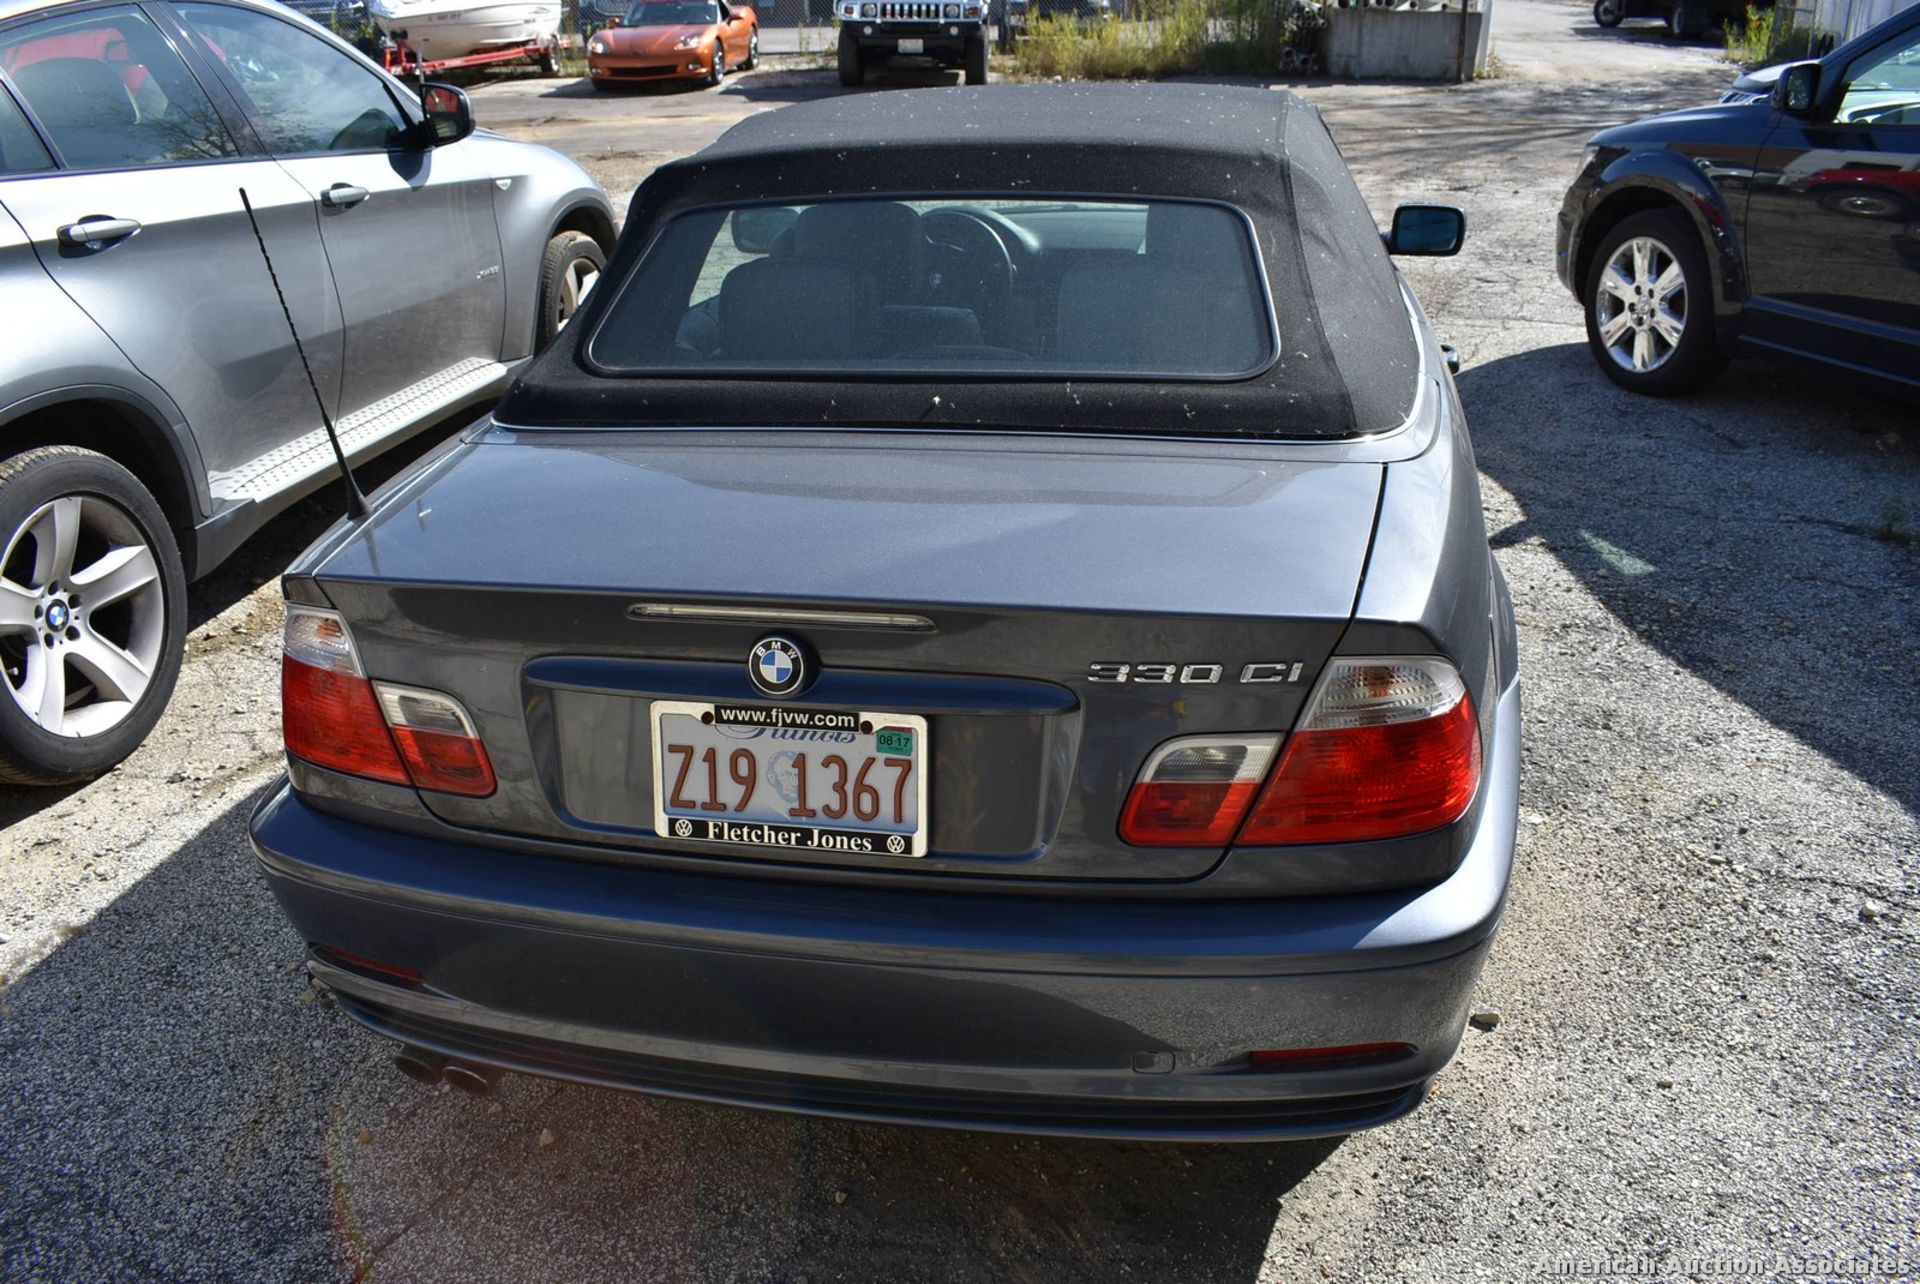 BMW 330CI TWO DOOR CONVERTIBLE COUPE VIN: WBABS53432JU95836 (2002) V-6, A/T, CONVERTIBLE TOP, - Image 5 of 6